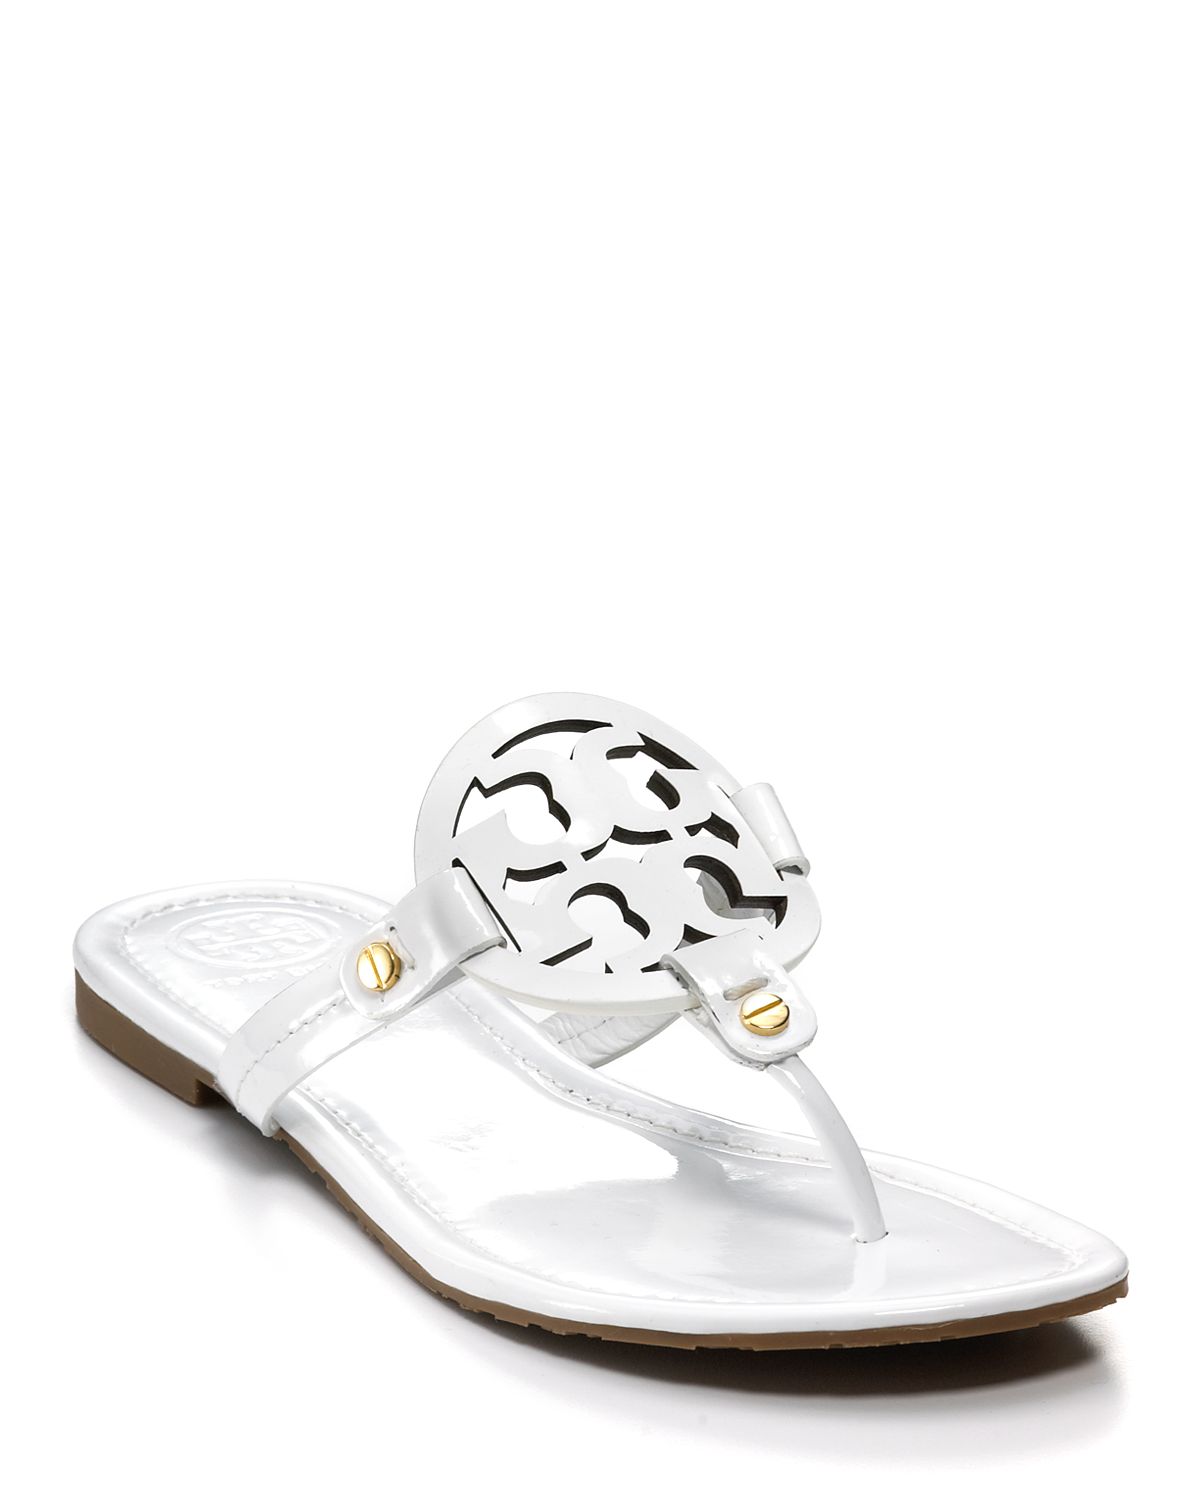 Tory Burch Sandals - Miller Thong in 